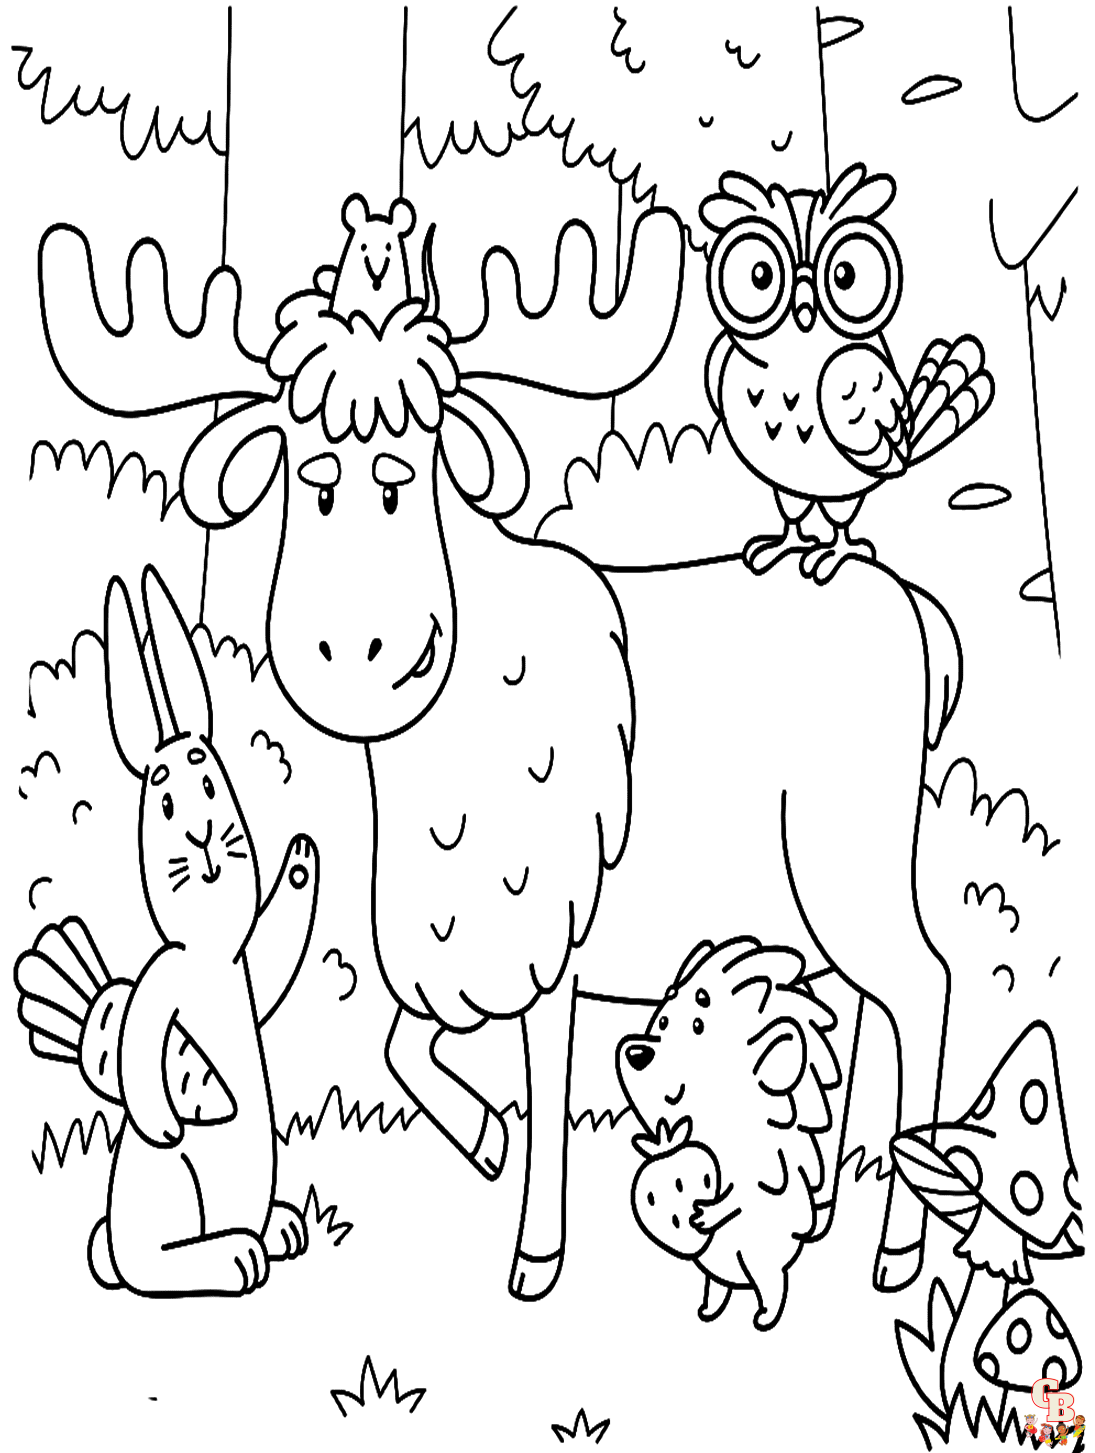 Foresrt coloring pages free